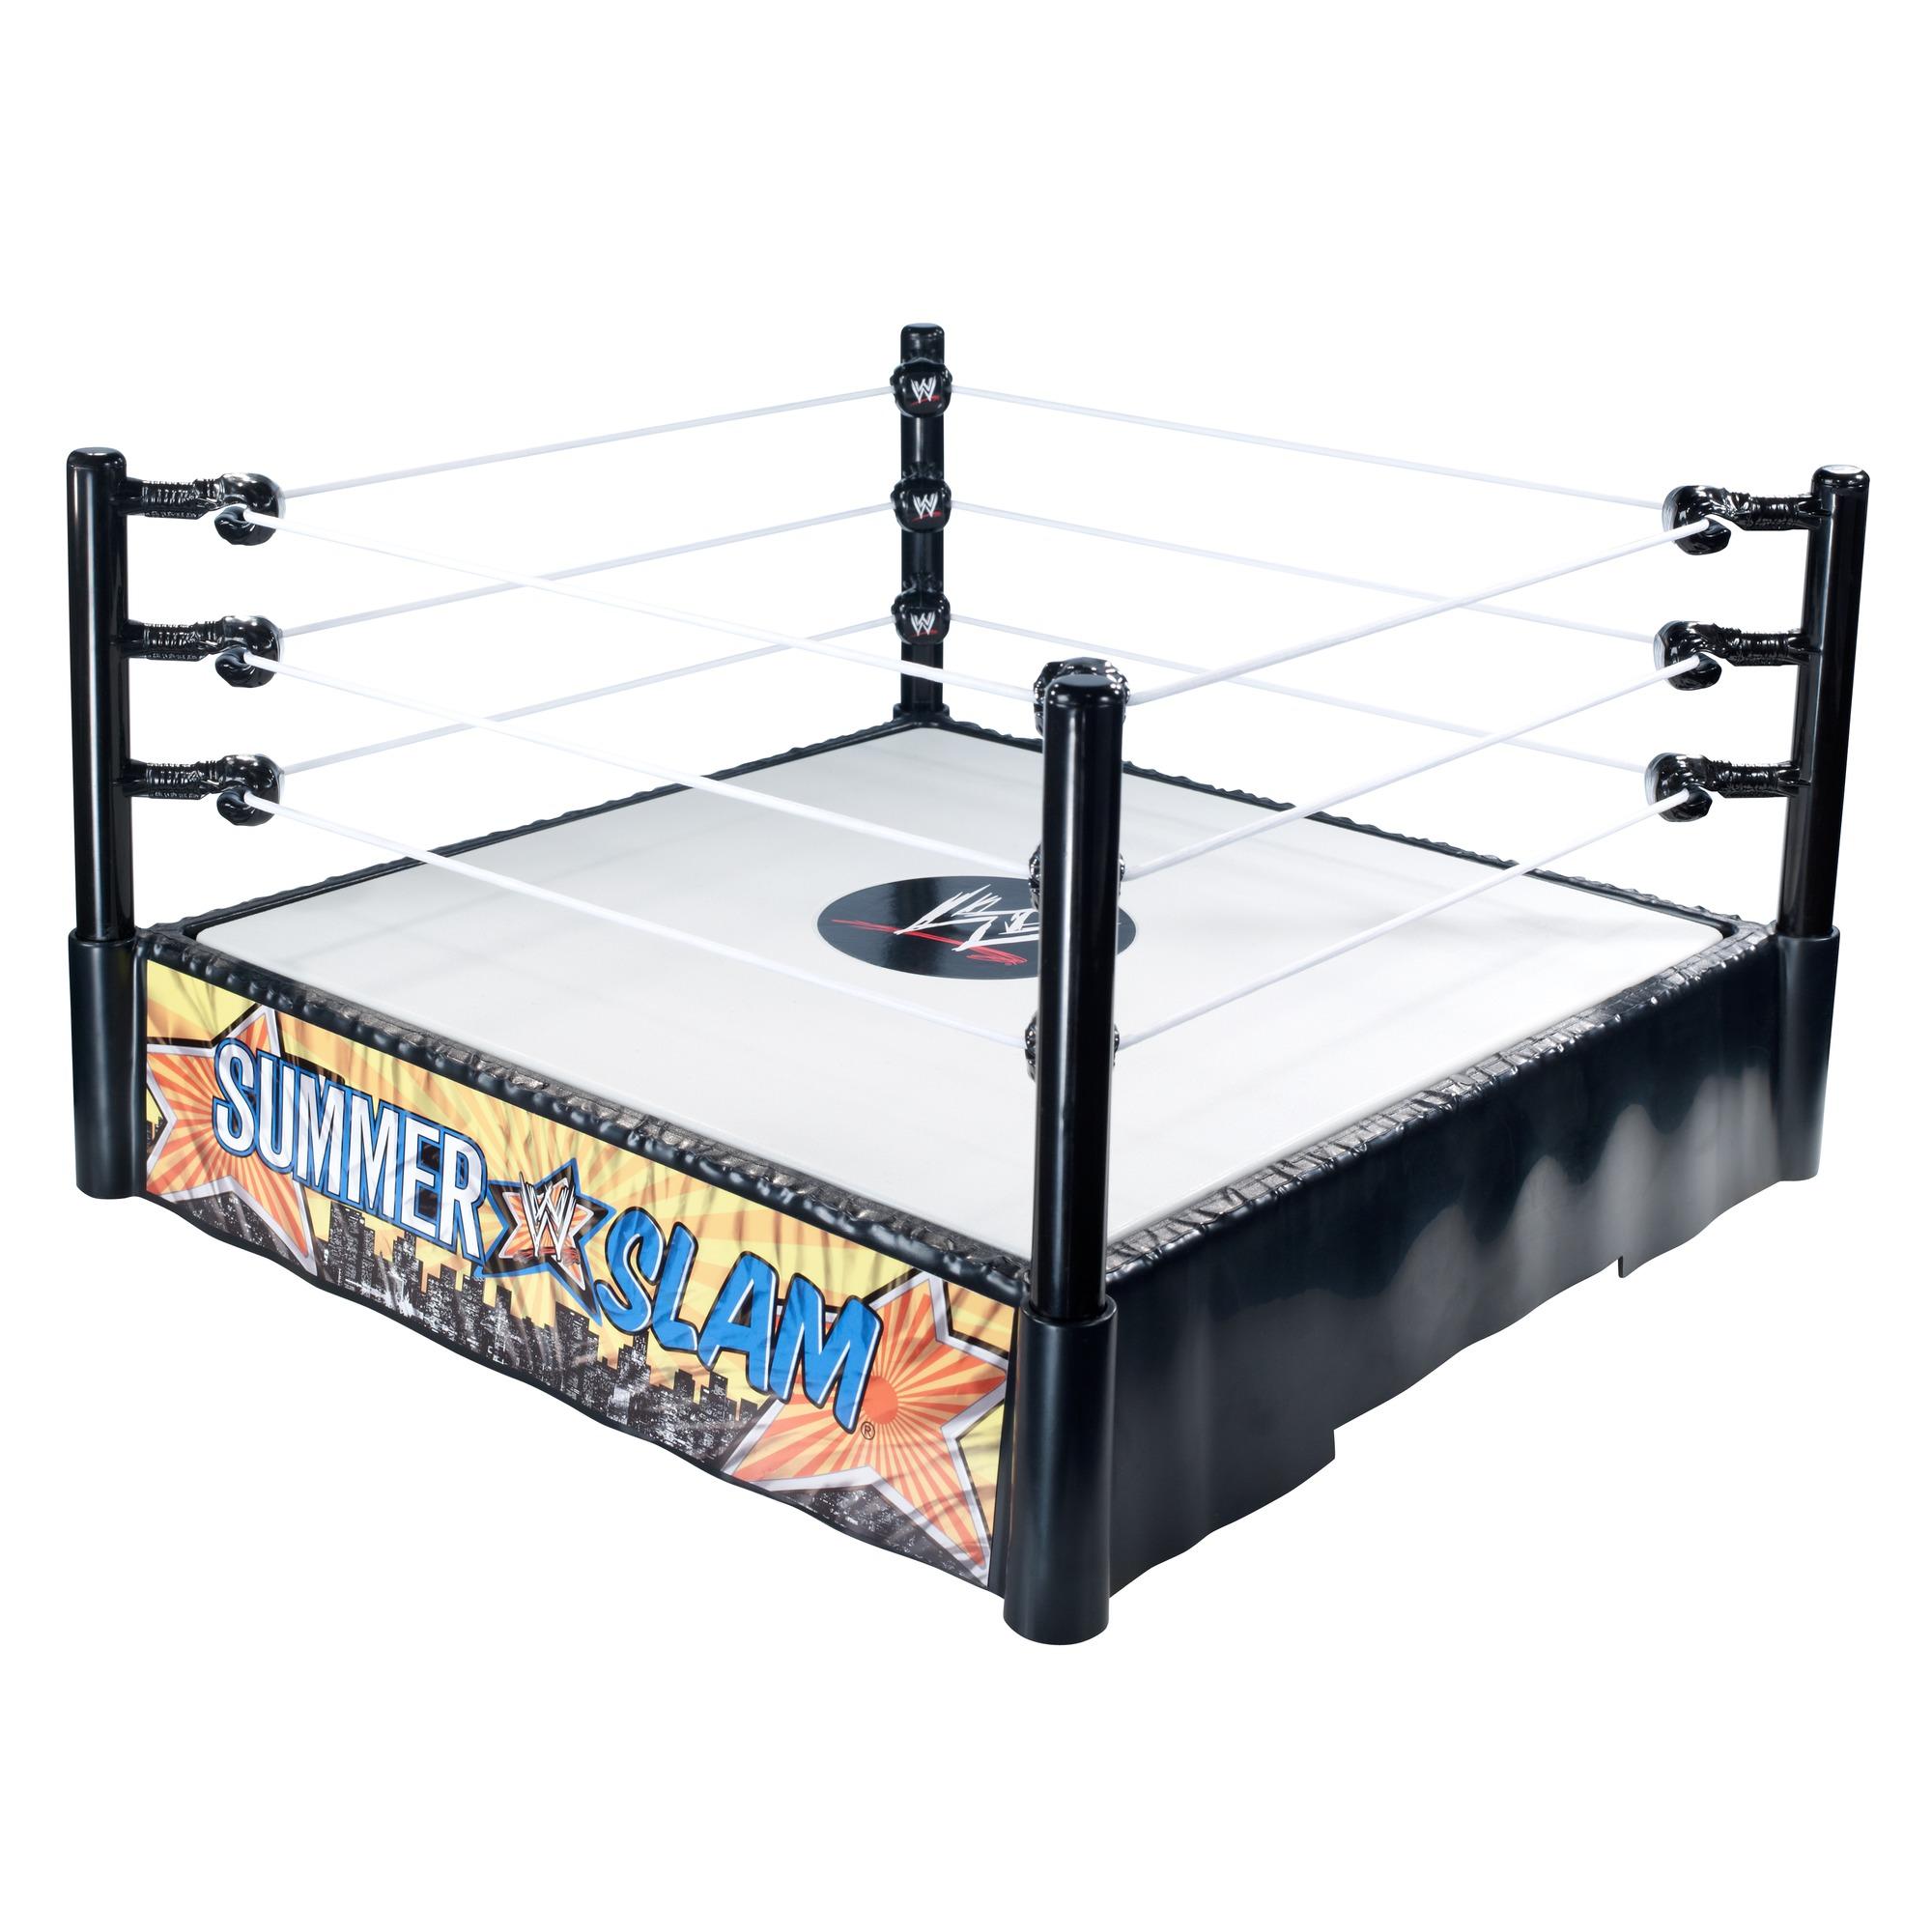 WWE SummerSlam 14" Across Ring with Ropes & Spring-Loaded Mat - image 1 of 3